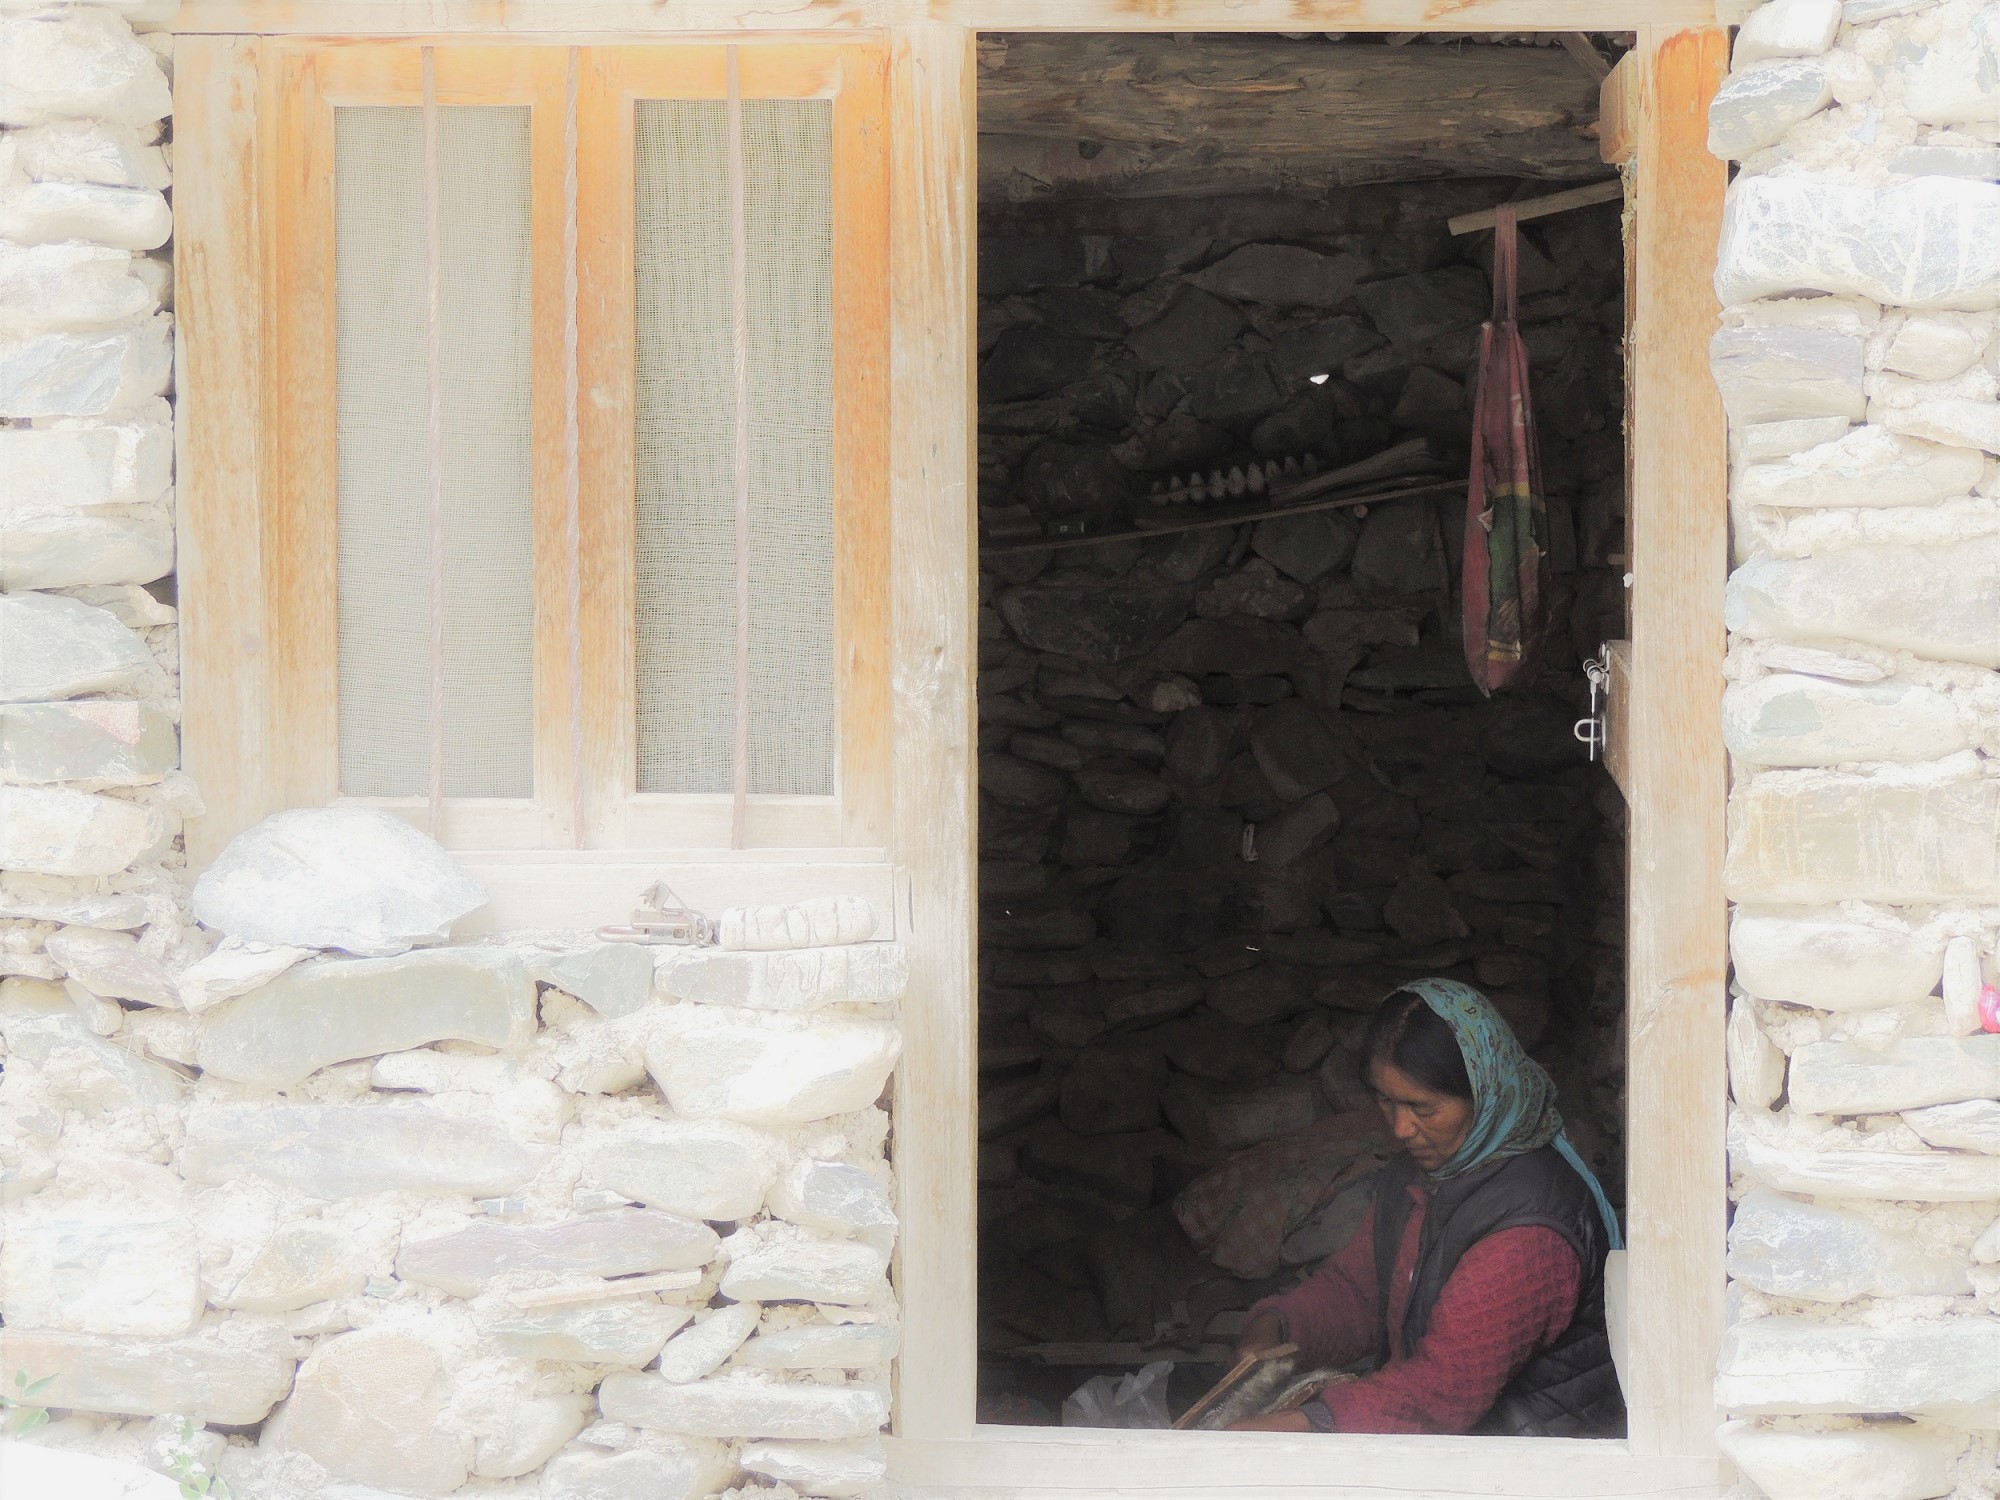 Hard to reach - Livelihood opportunities for women in the Himalaya